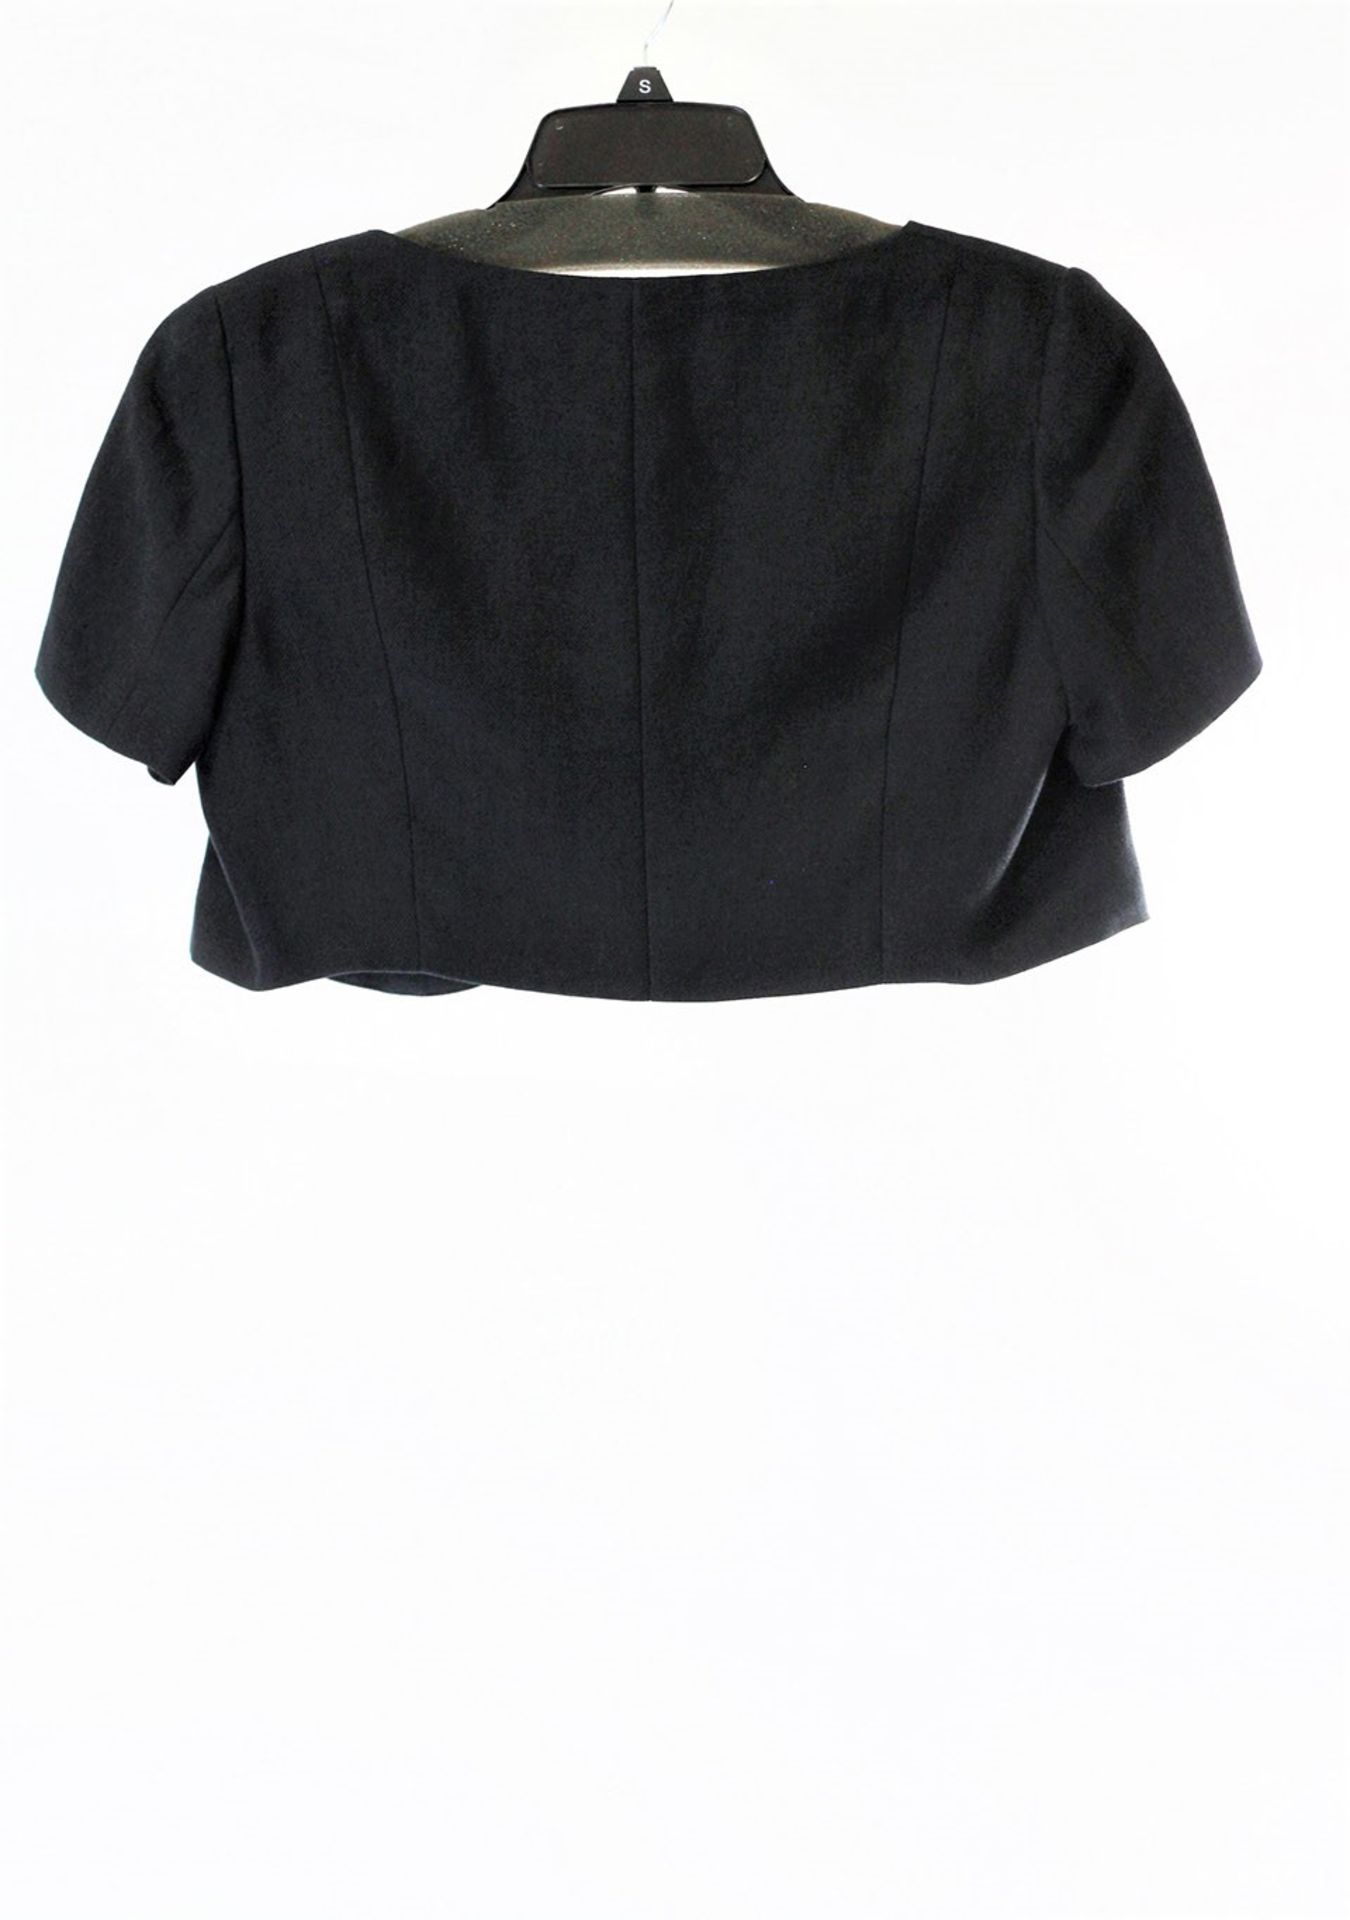 1 x Natan Black Bolero - Size: 10 - Material: 100% Linen - From a High End Clothing Boutique In - Image 2 of 10